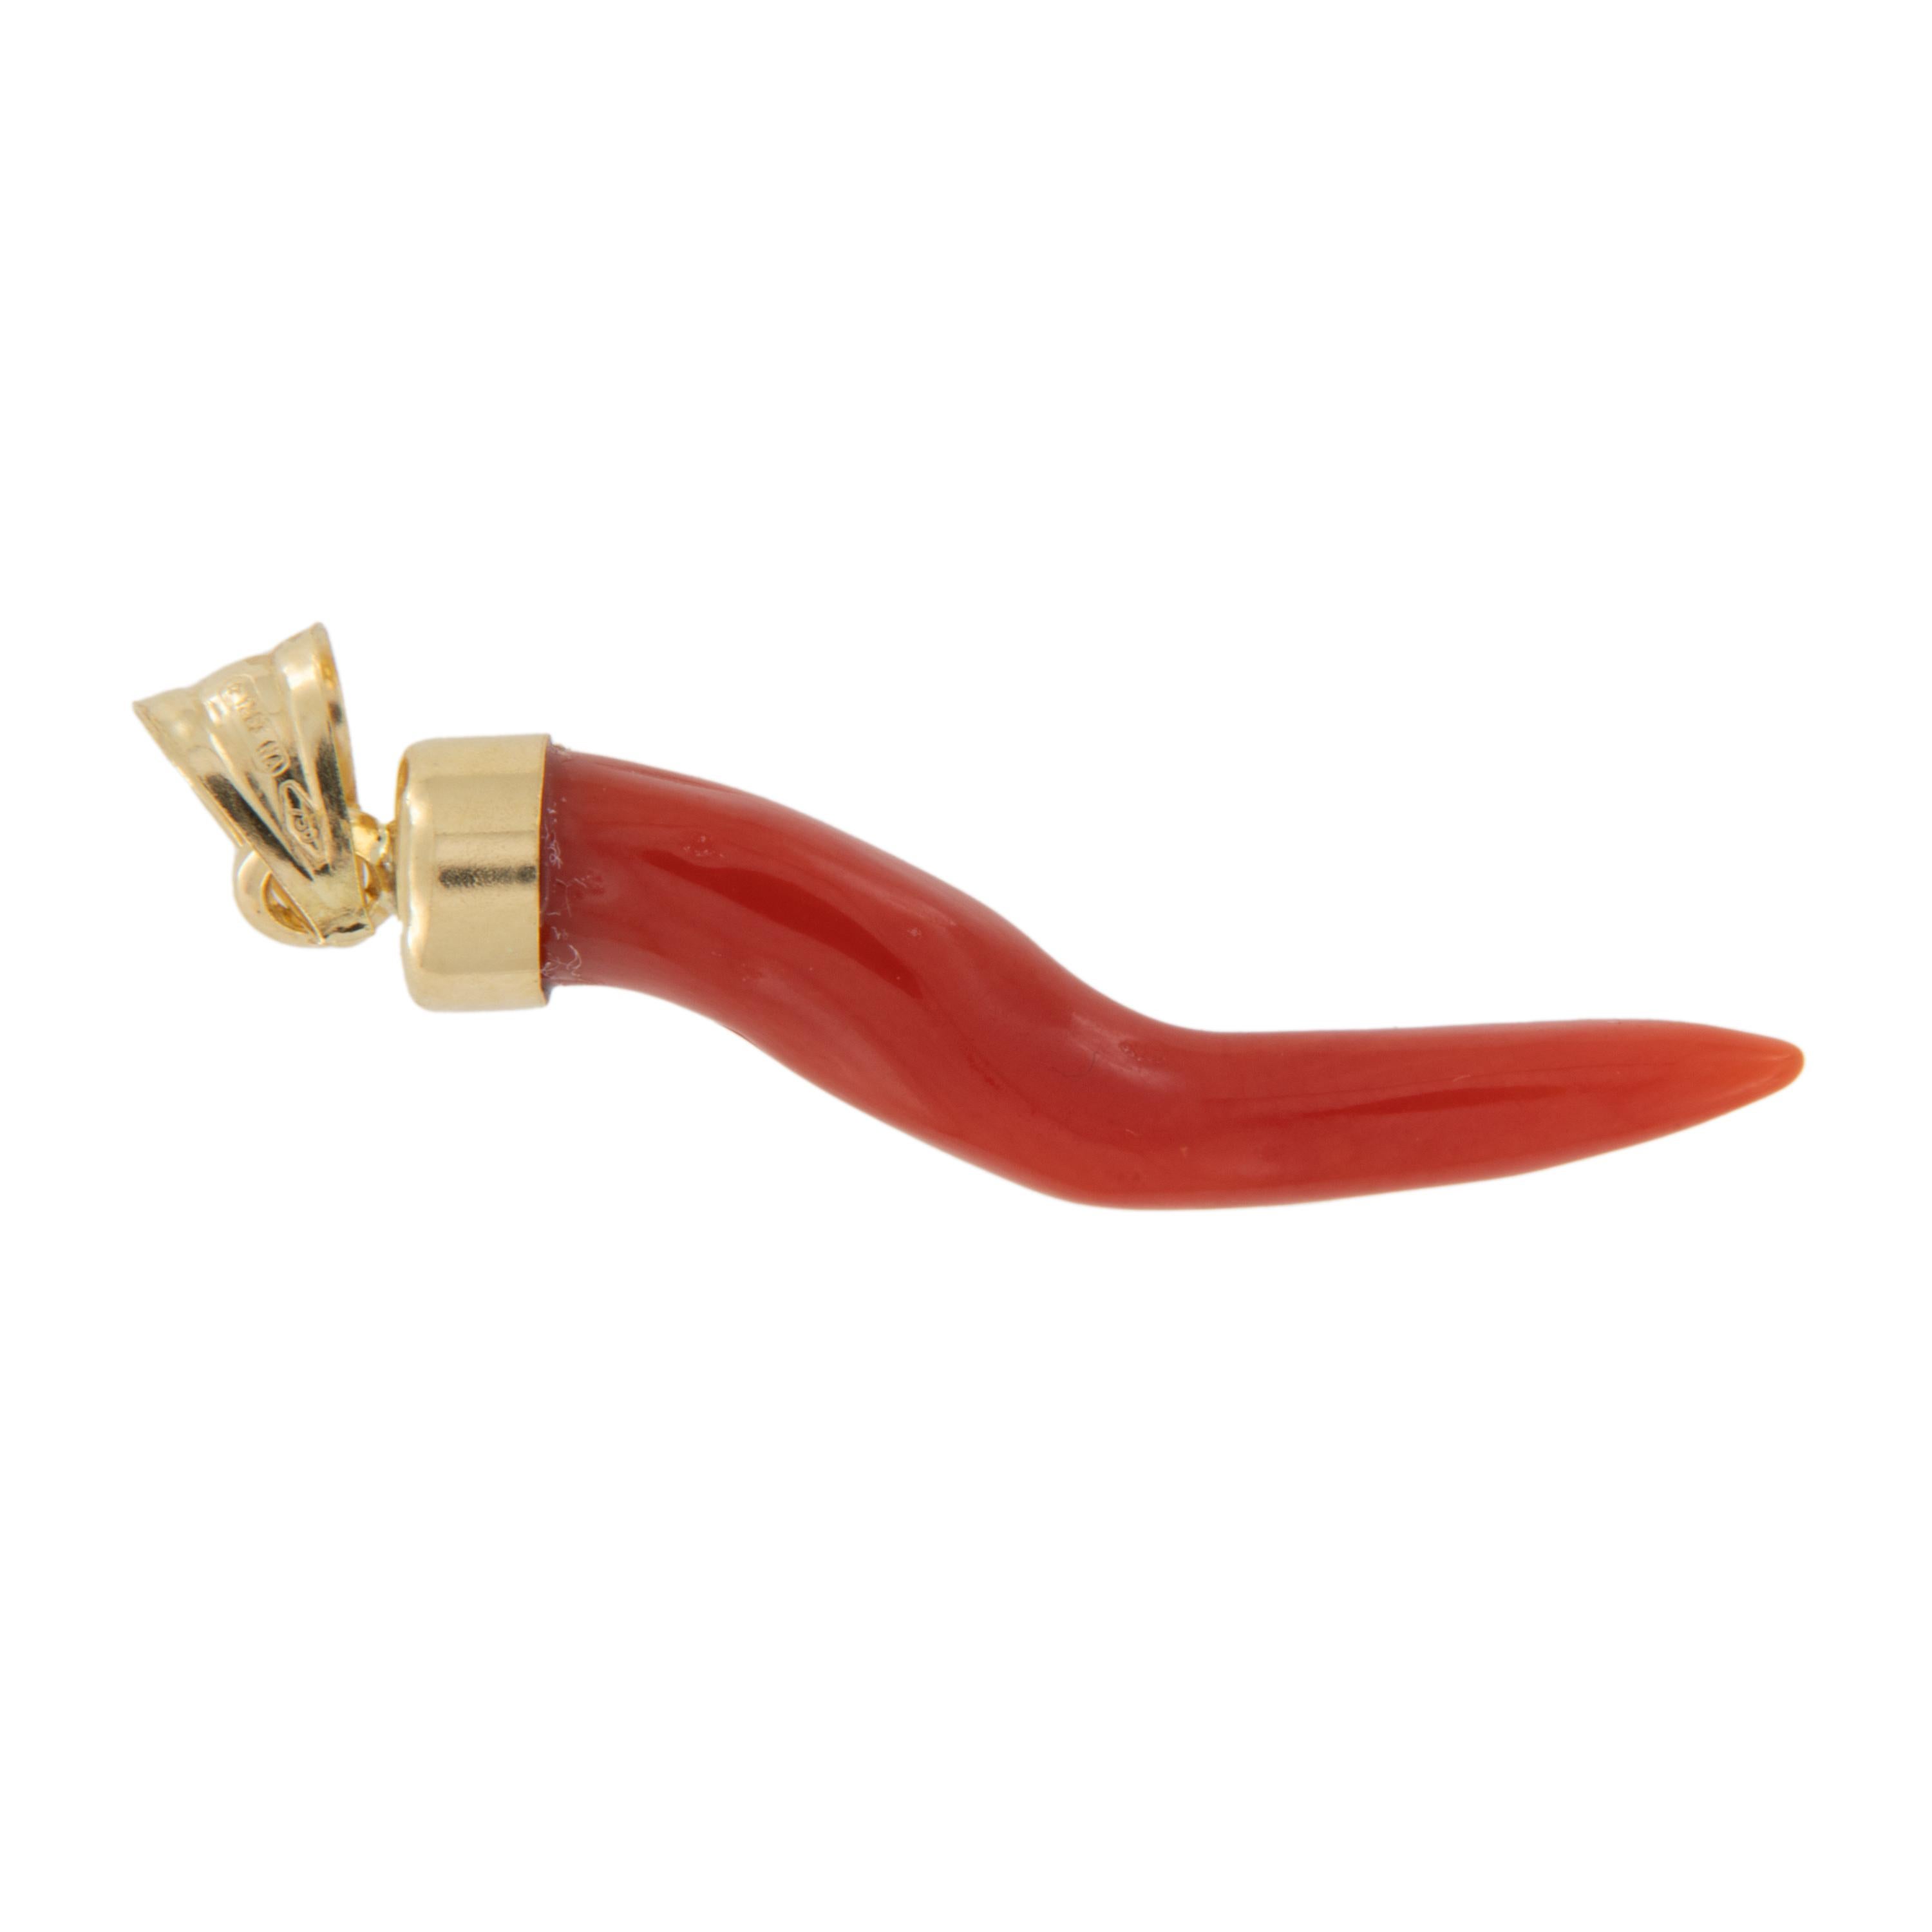 The Italian horn is a symbol of good luck and is believed to protect the wearer. Why not look stylish while wearing it? Made of exceptional red Mediterranean coral that is set off by the rich 18 karat yellow gold holding it. Limited quantity, get